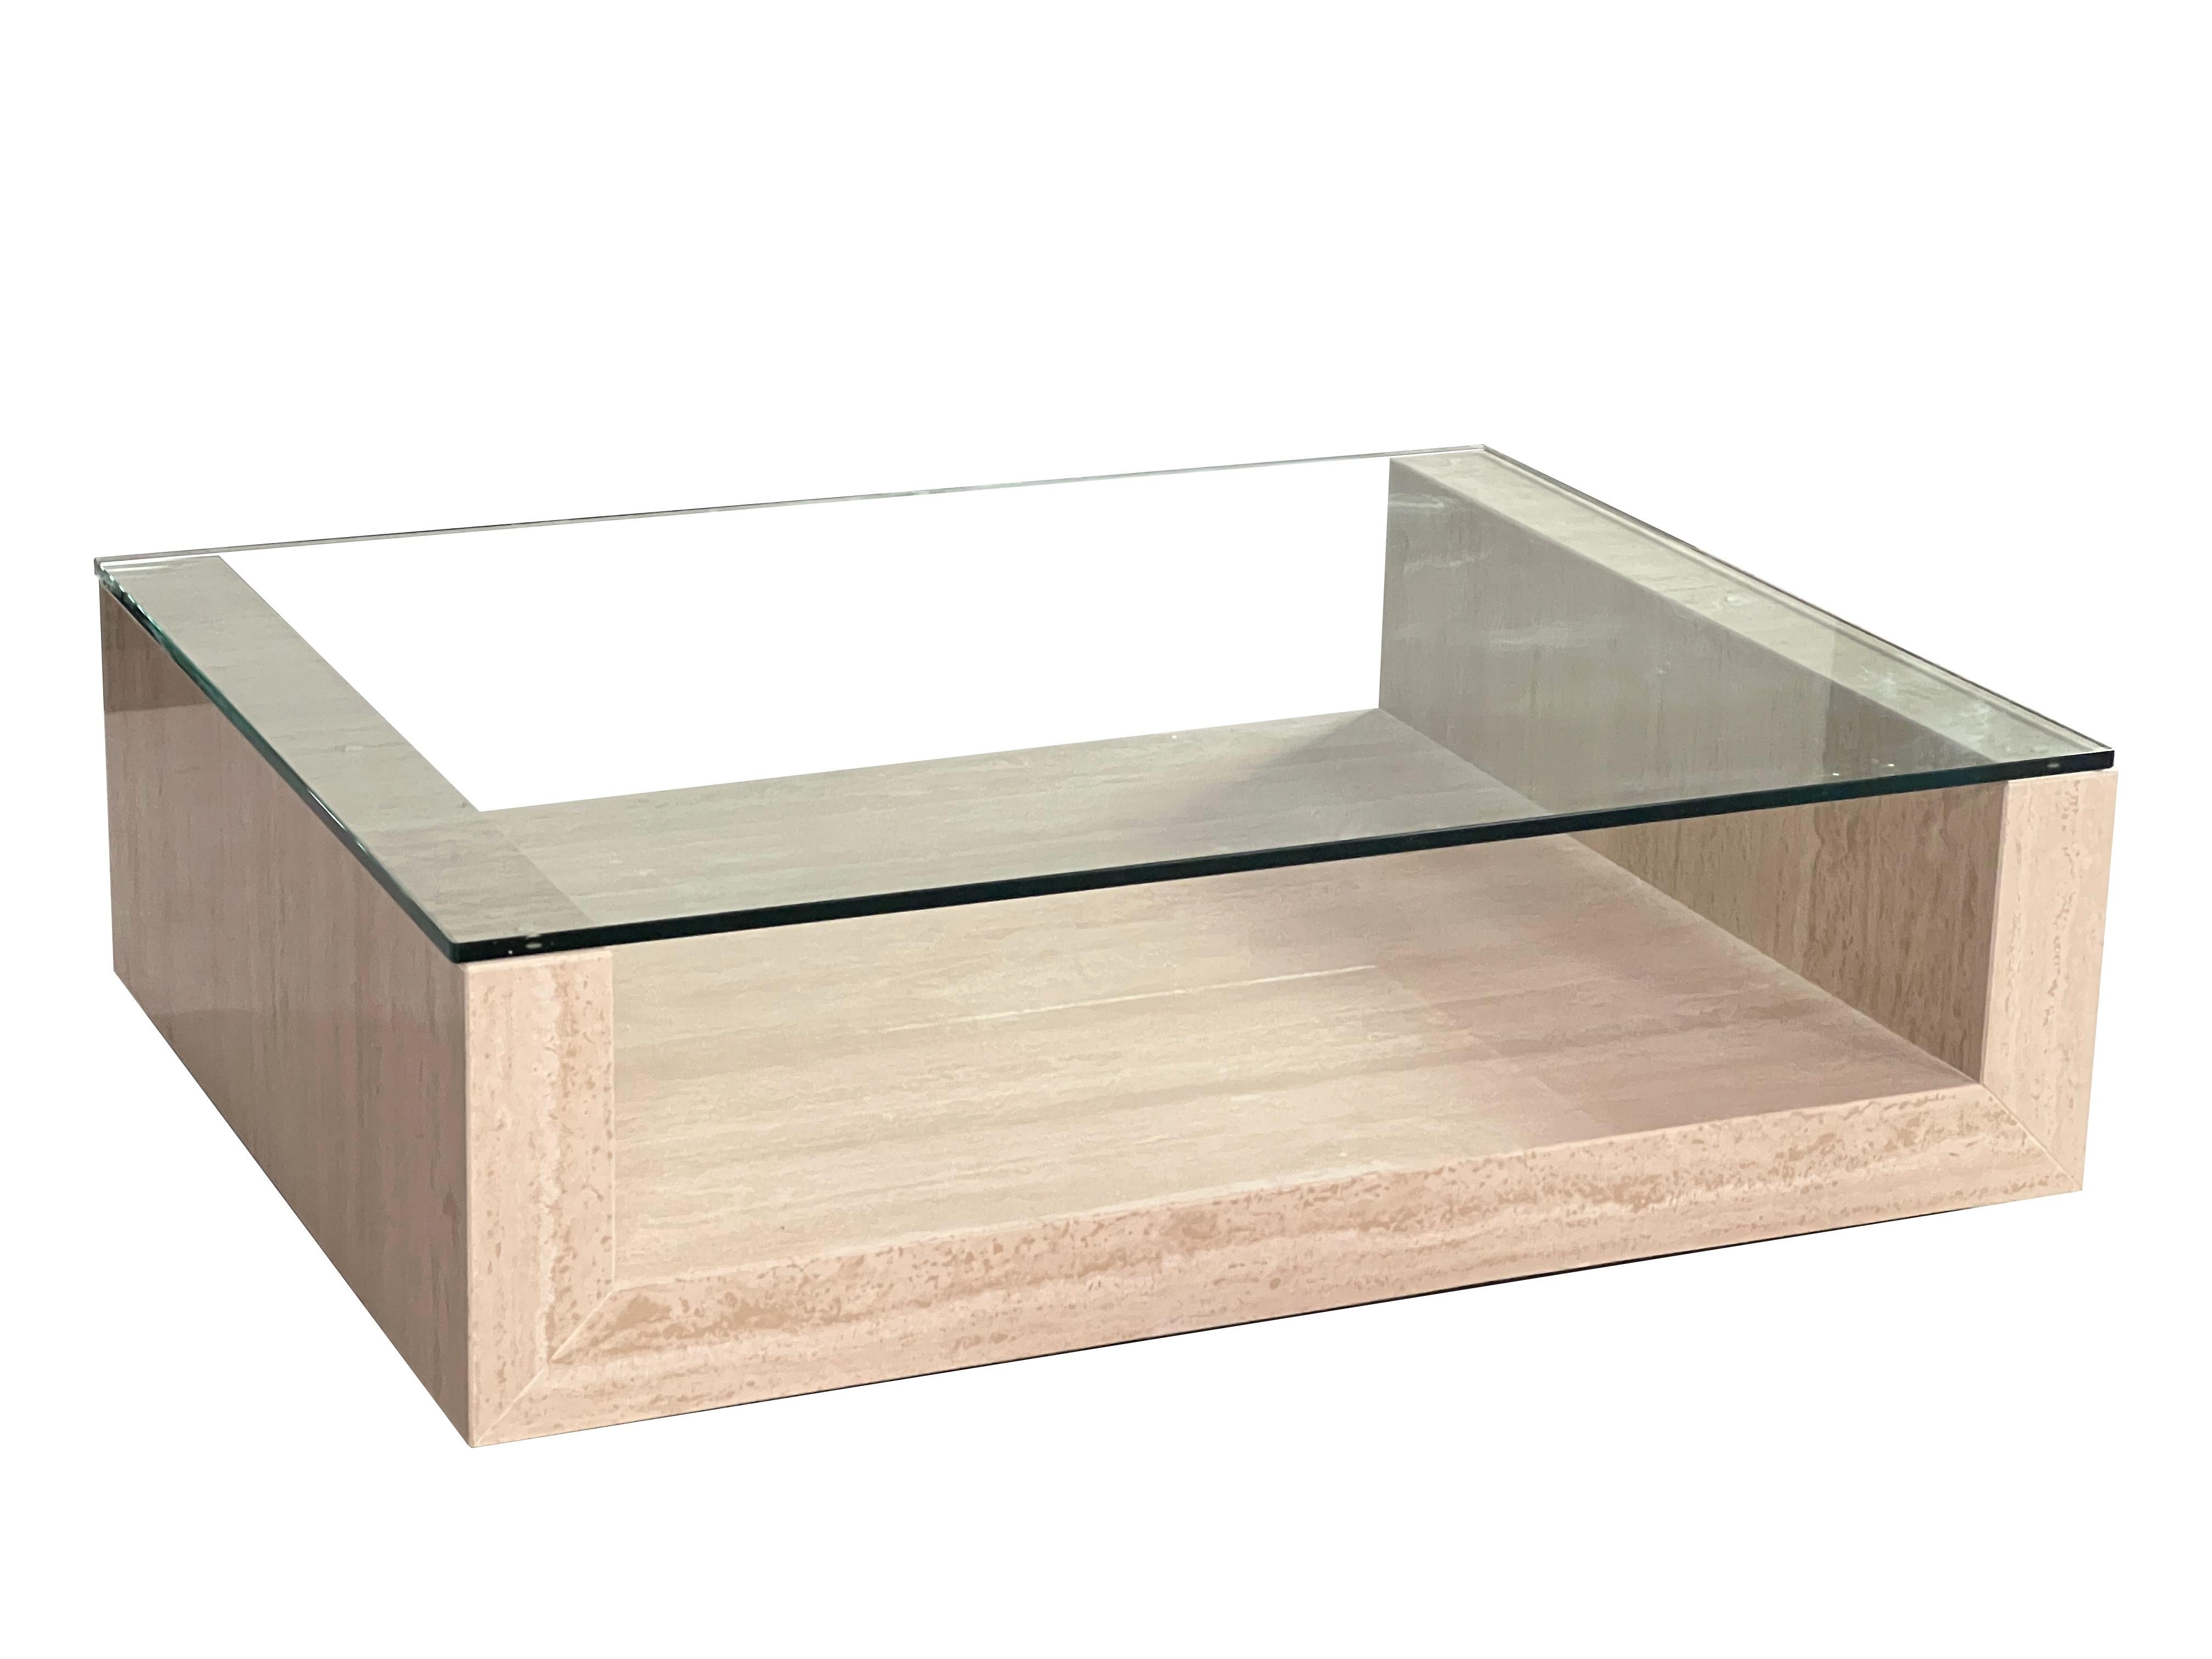 Polished Travertine Marble AMIA Table Contemporary Design Made in Spain Meddel in Stock For Sale